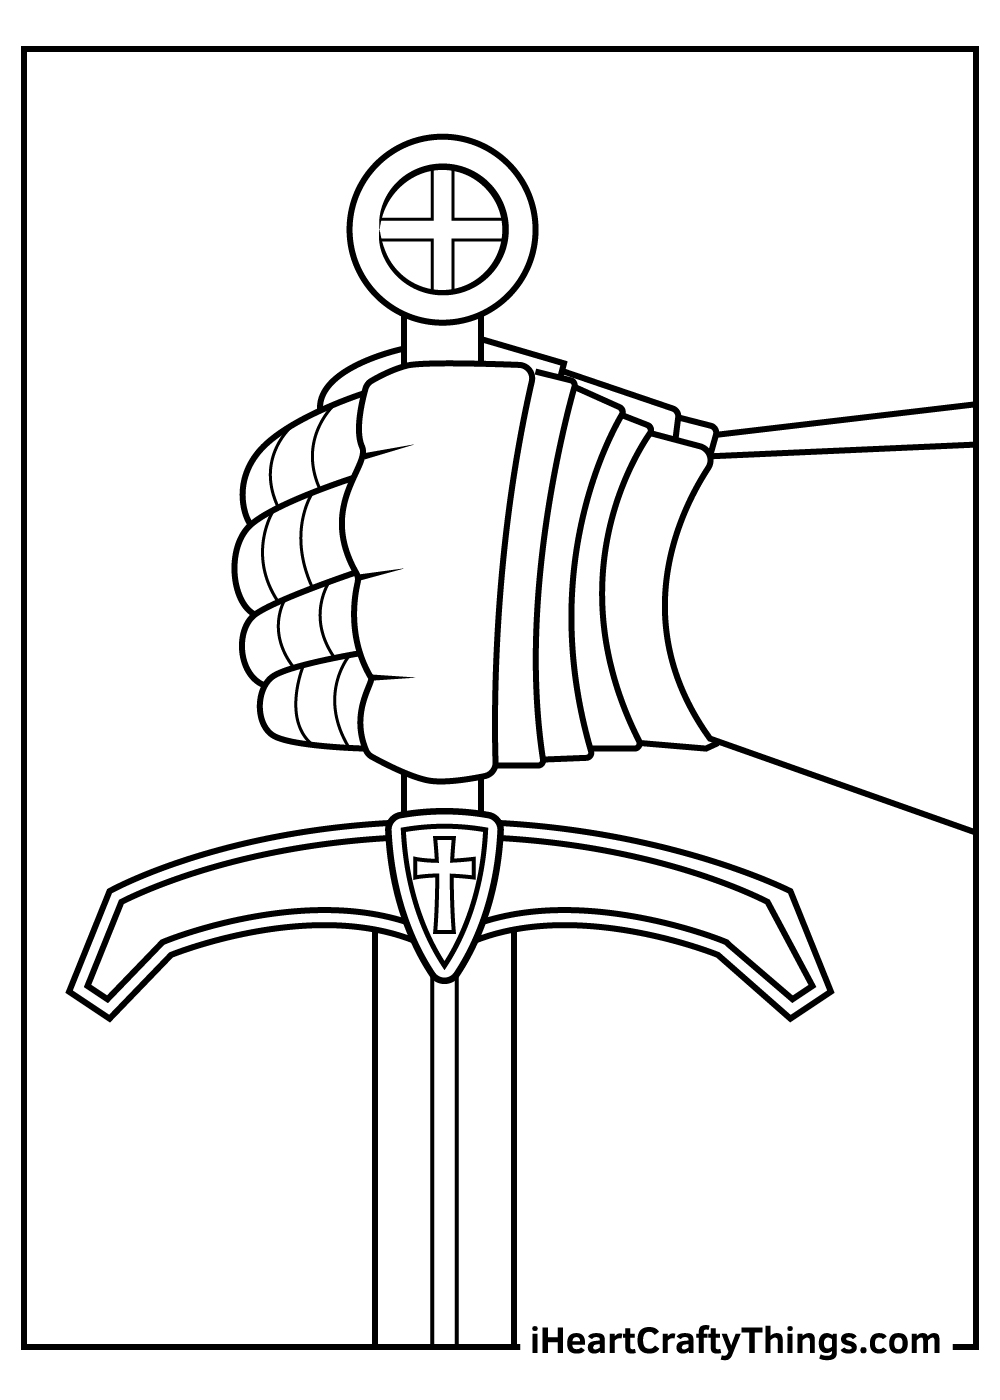 Knight coloring pages free printables